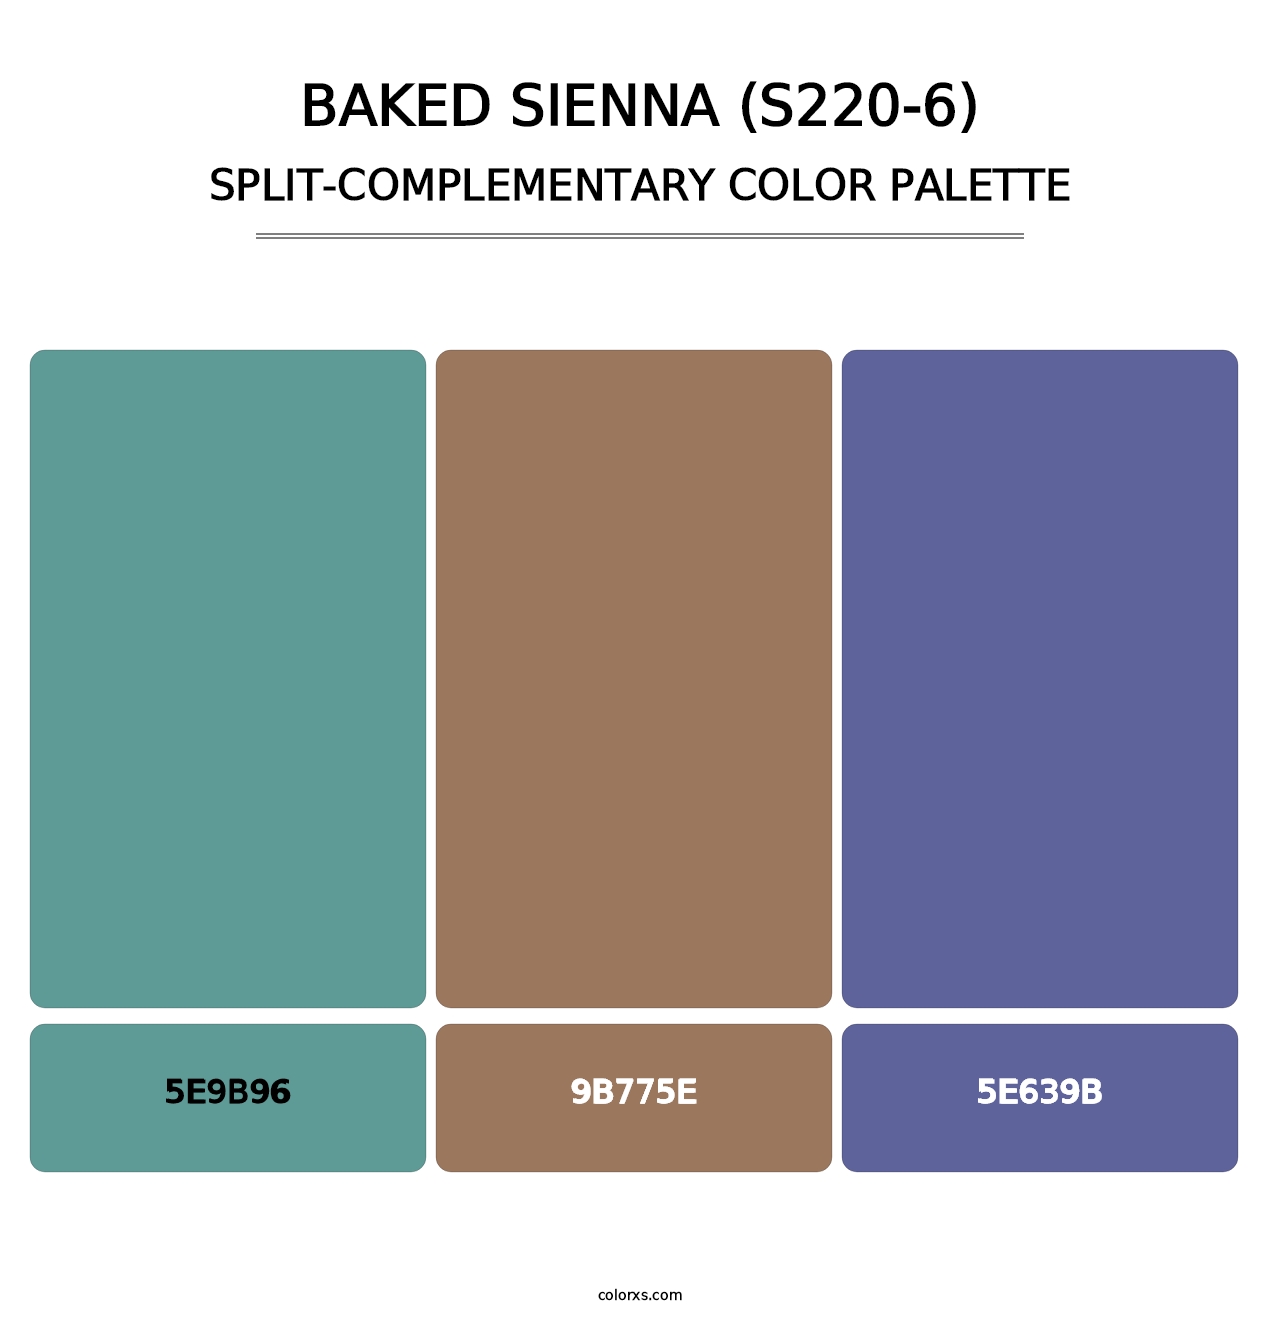 Baked Sienna (S220-6) - Split-Complementary Color Palette